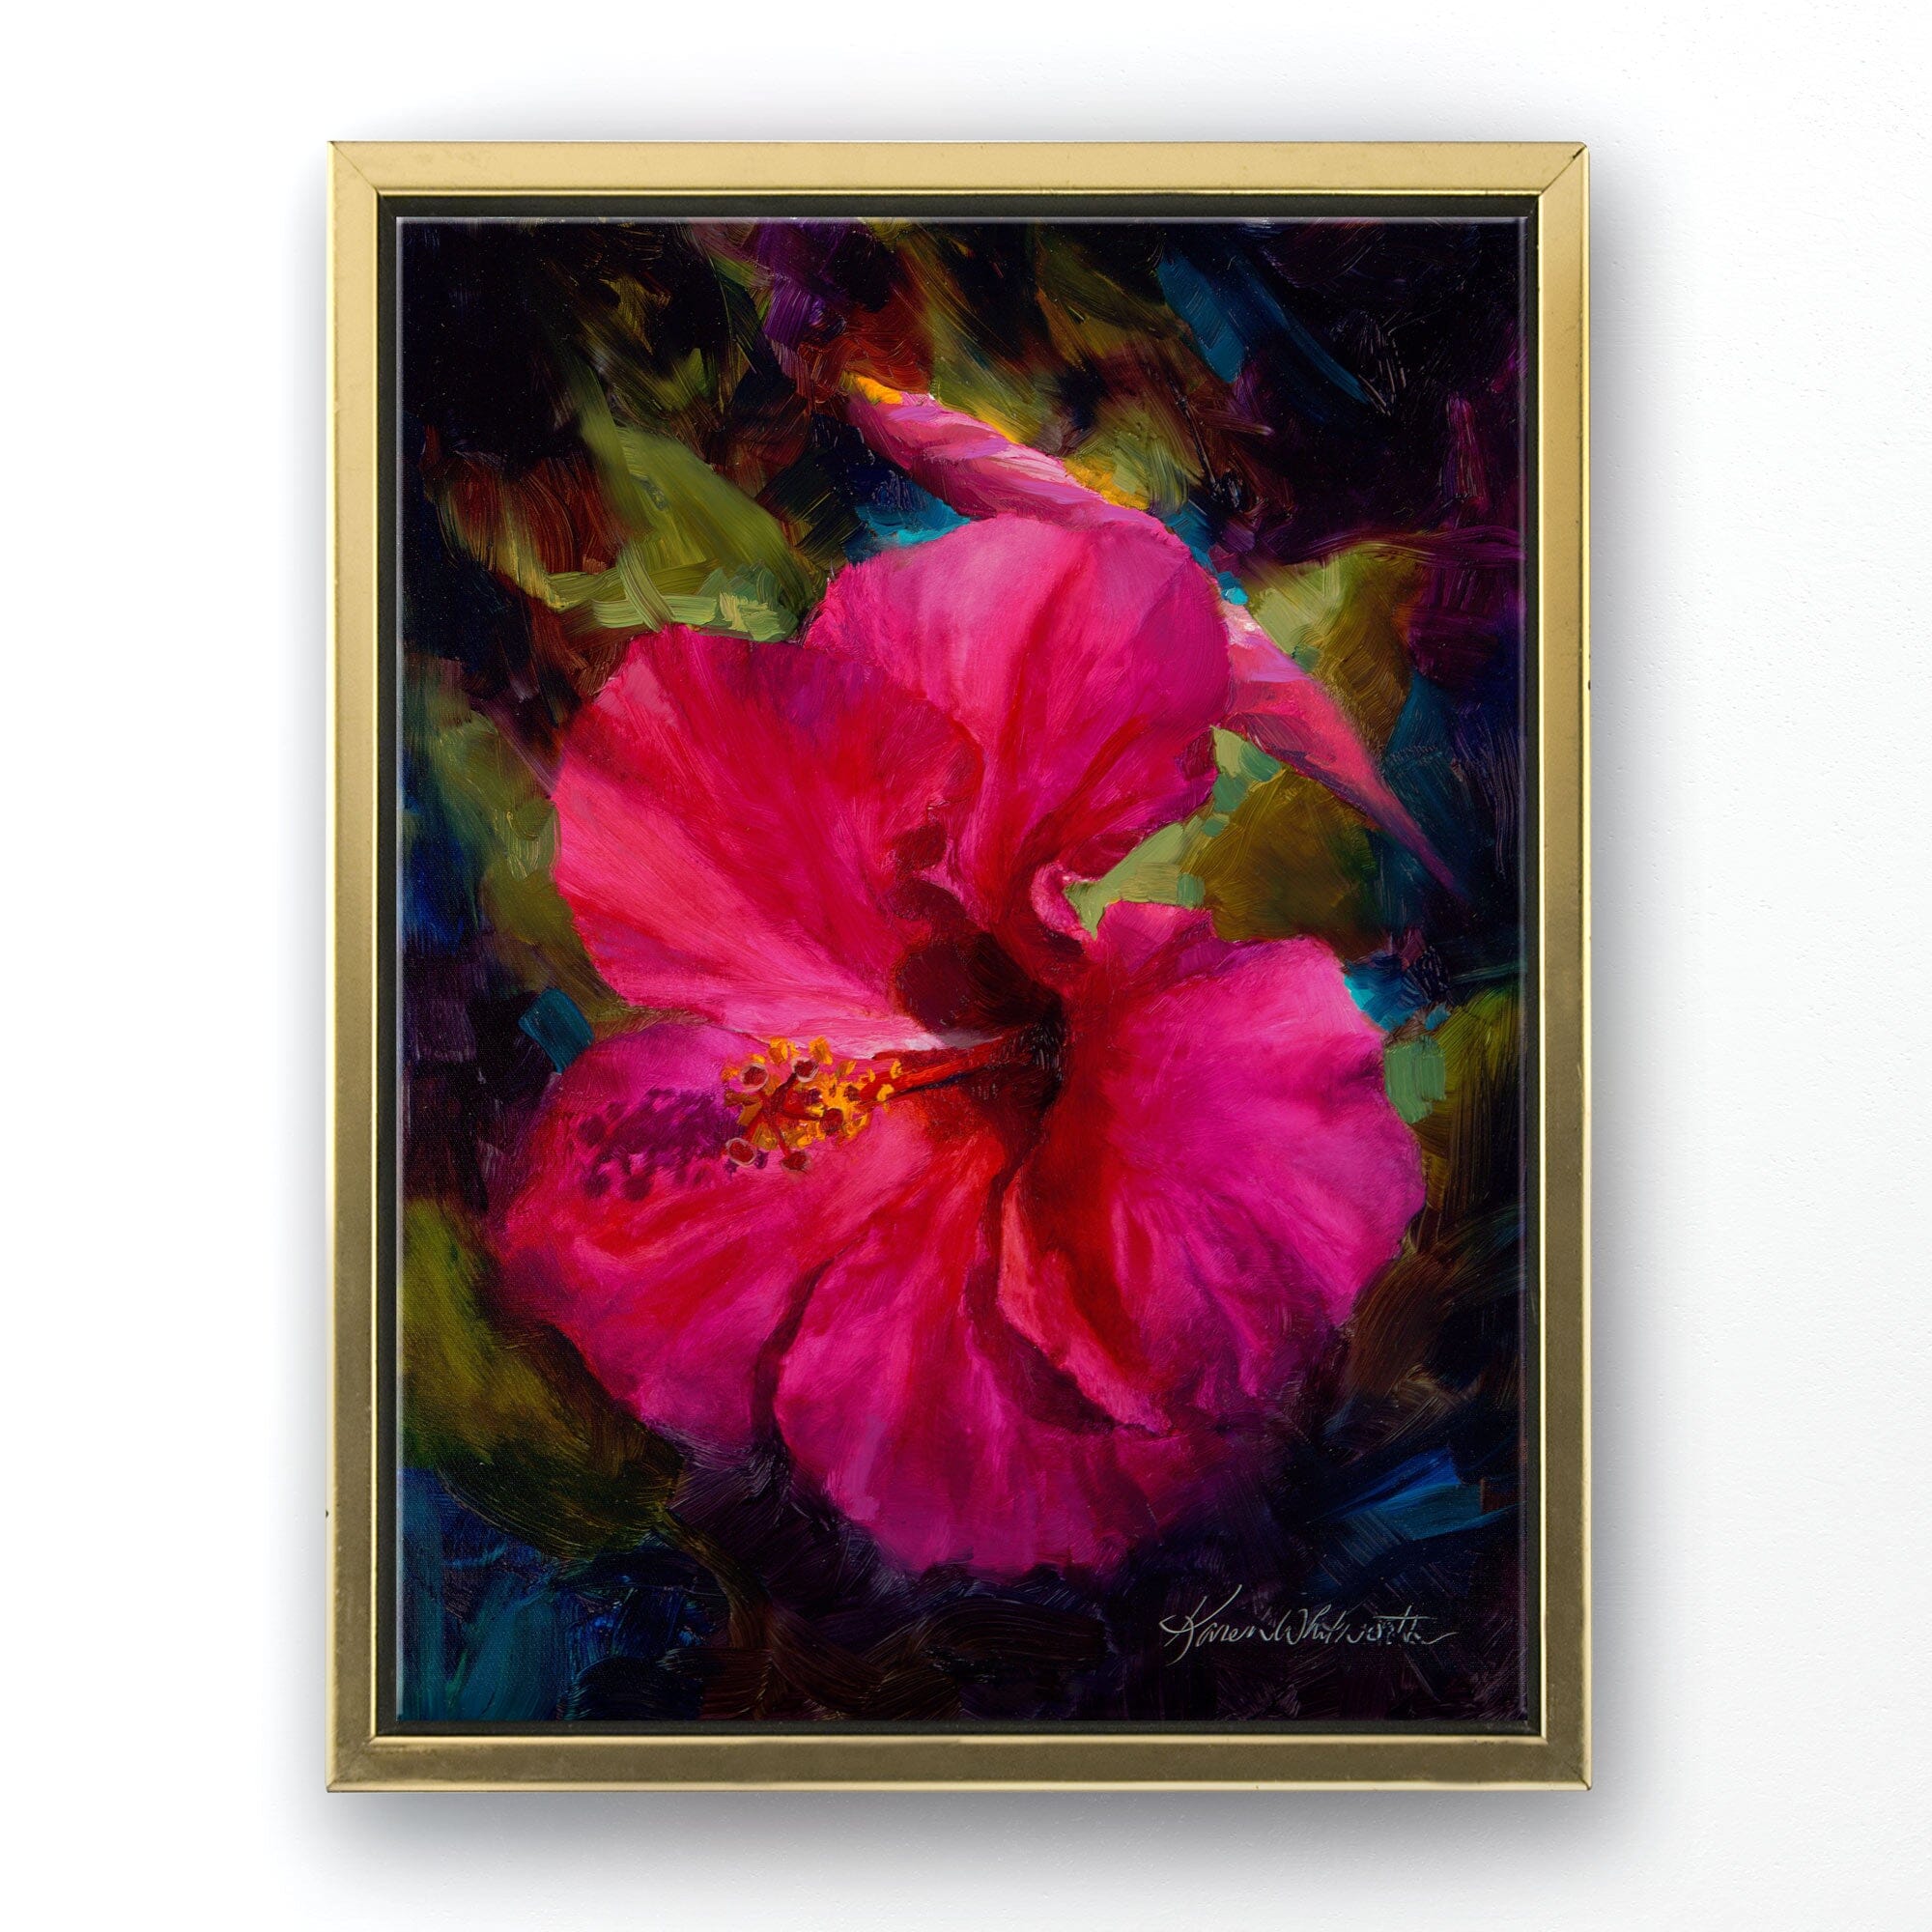 Hawaiian Hibiscus canvas art of pink tropical flower painting by Karen Whitworth. The artwork is framed in a gold floater frame and is hanging on a white wall.